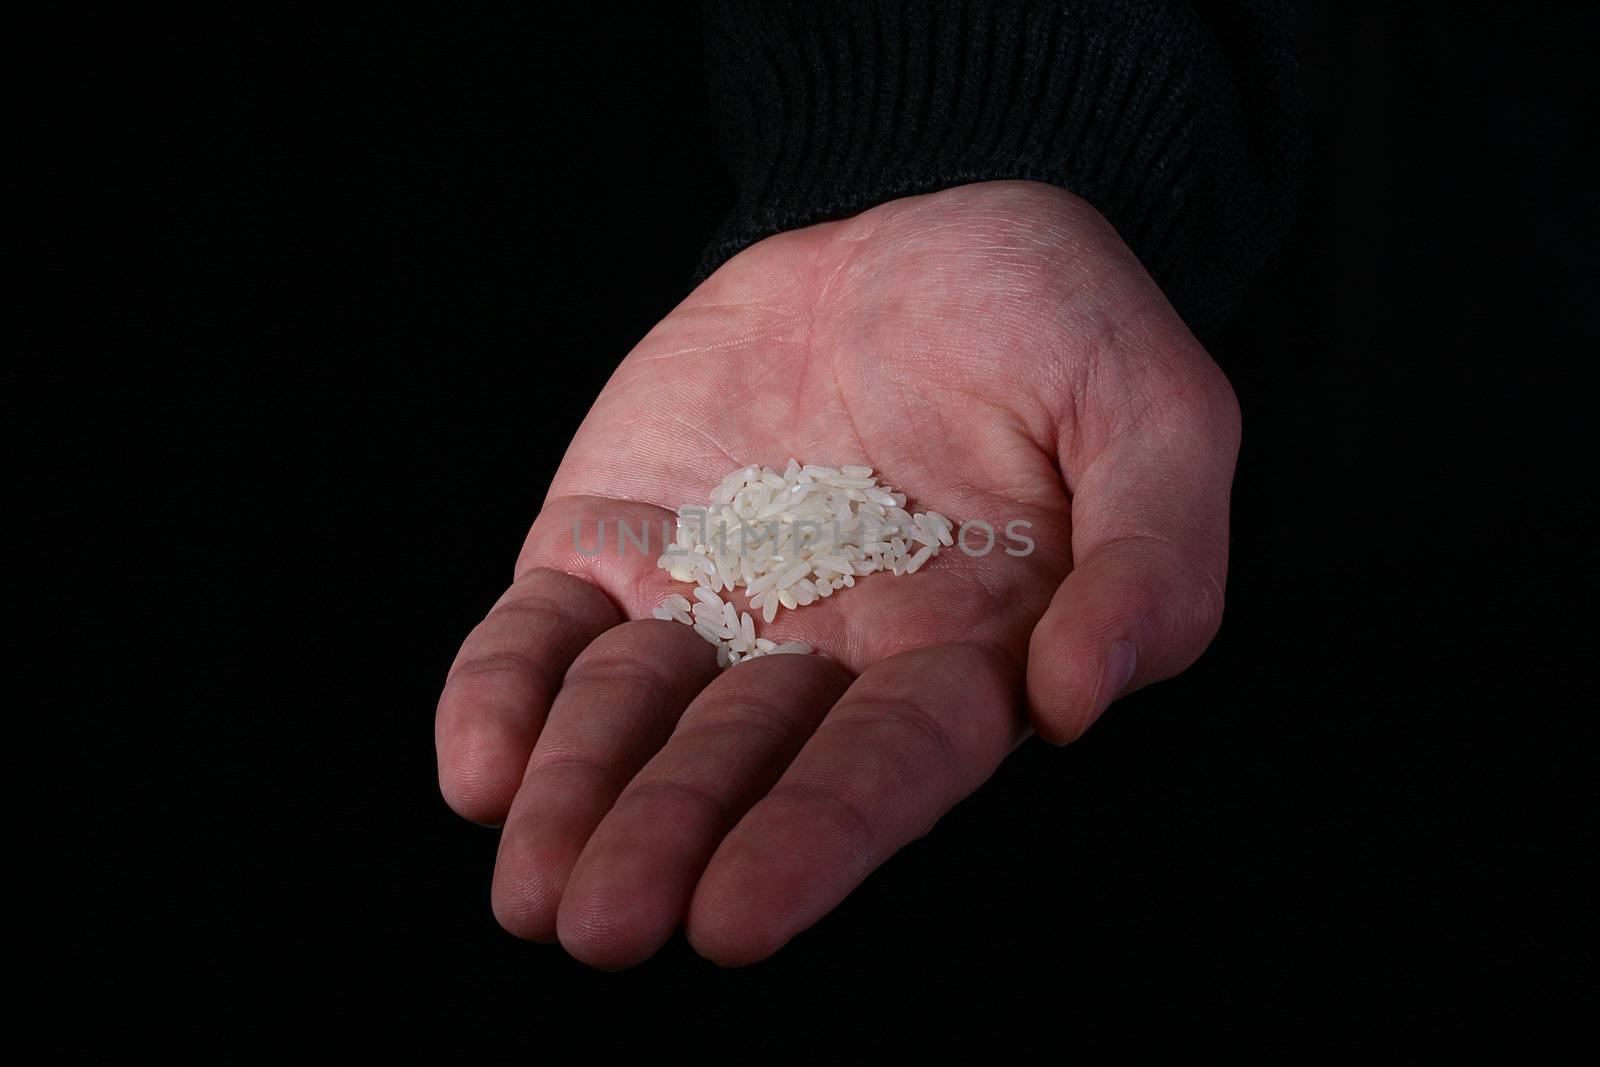 Man is hand with a small handful of rice on a black background.